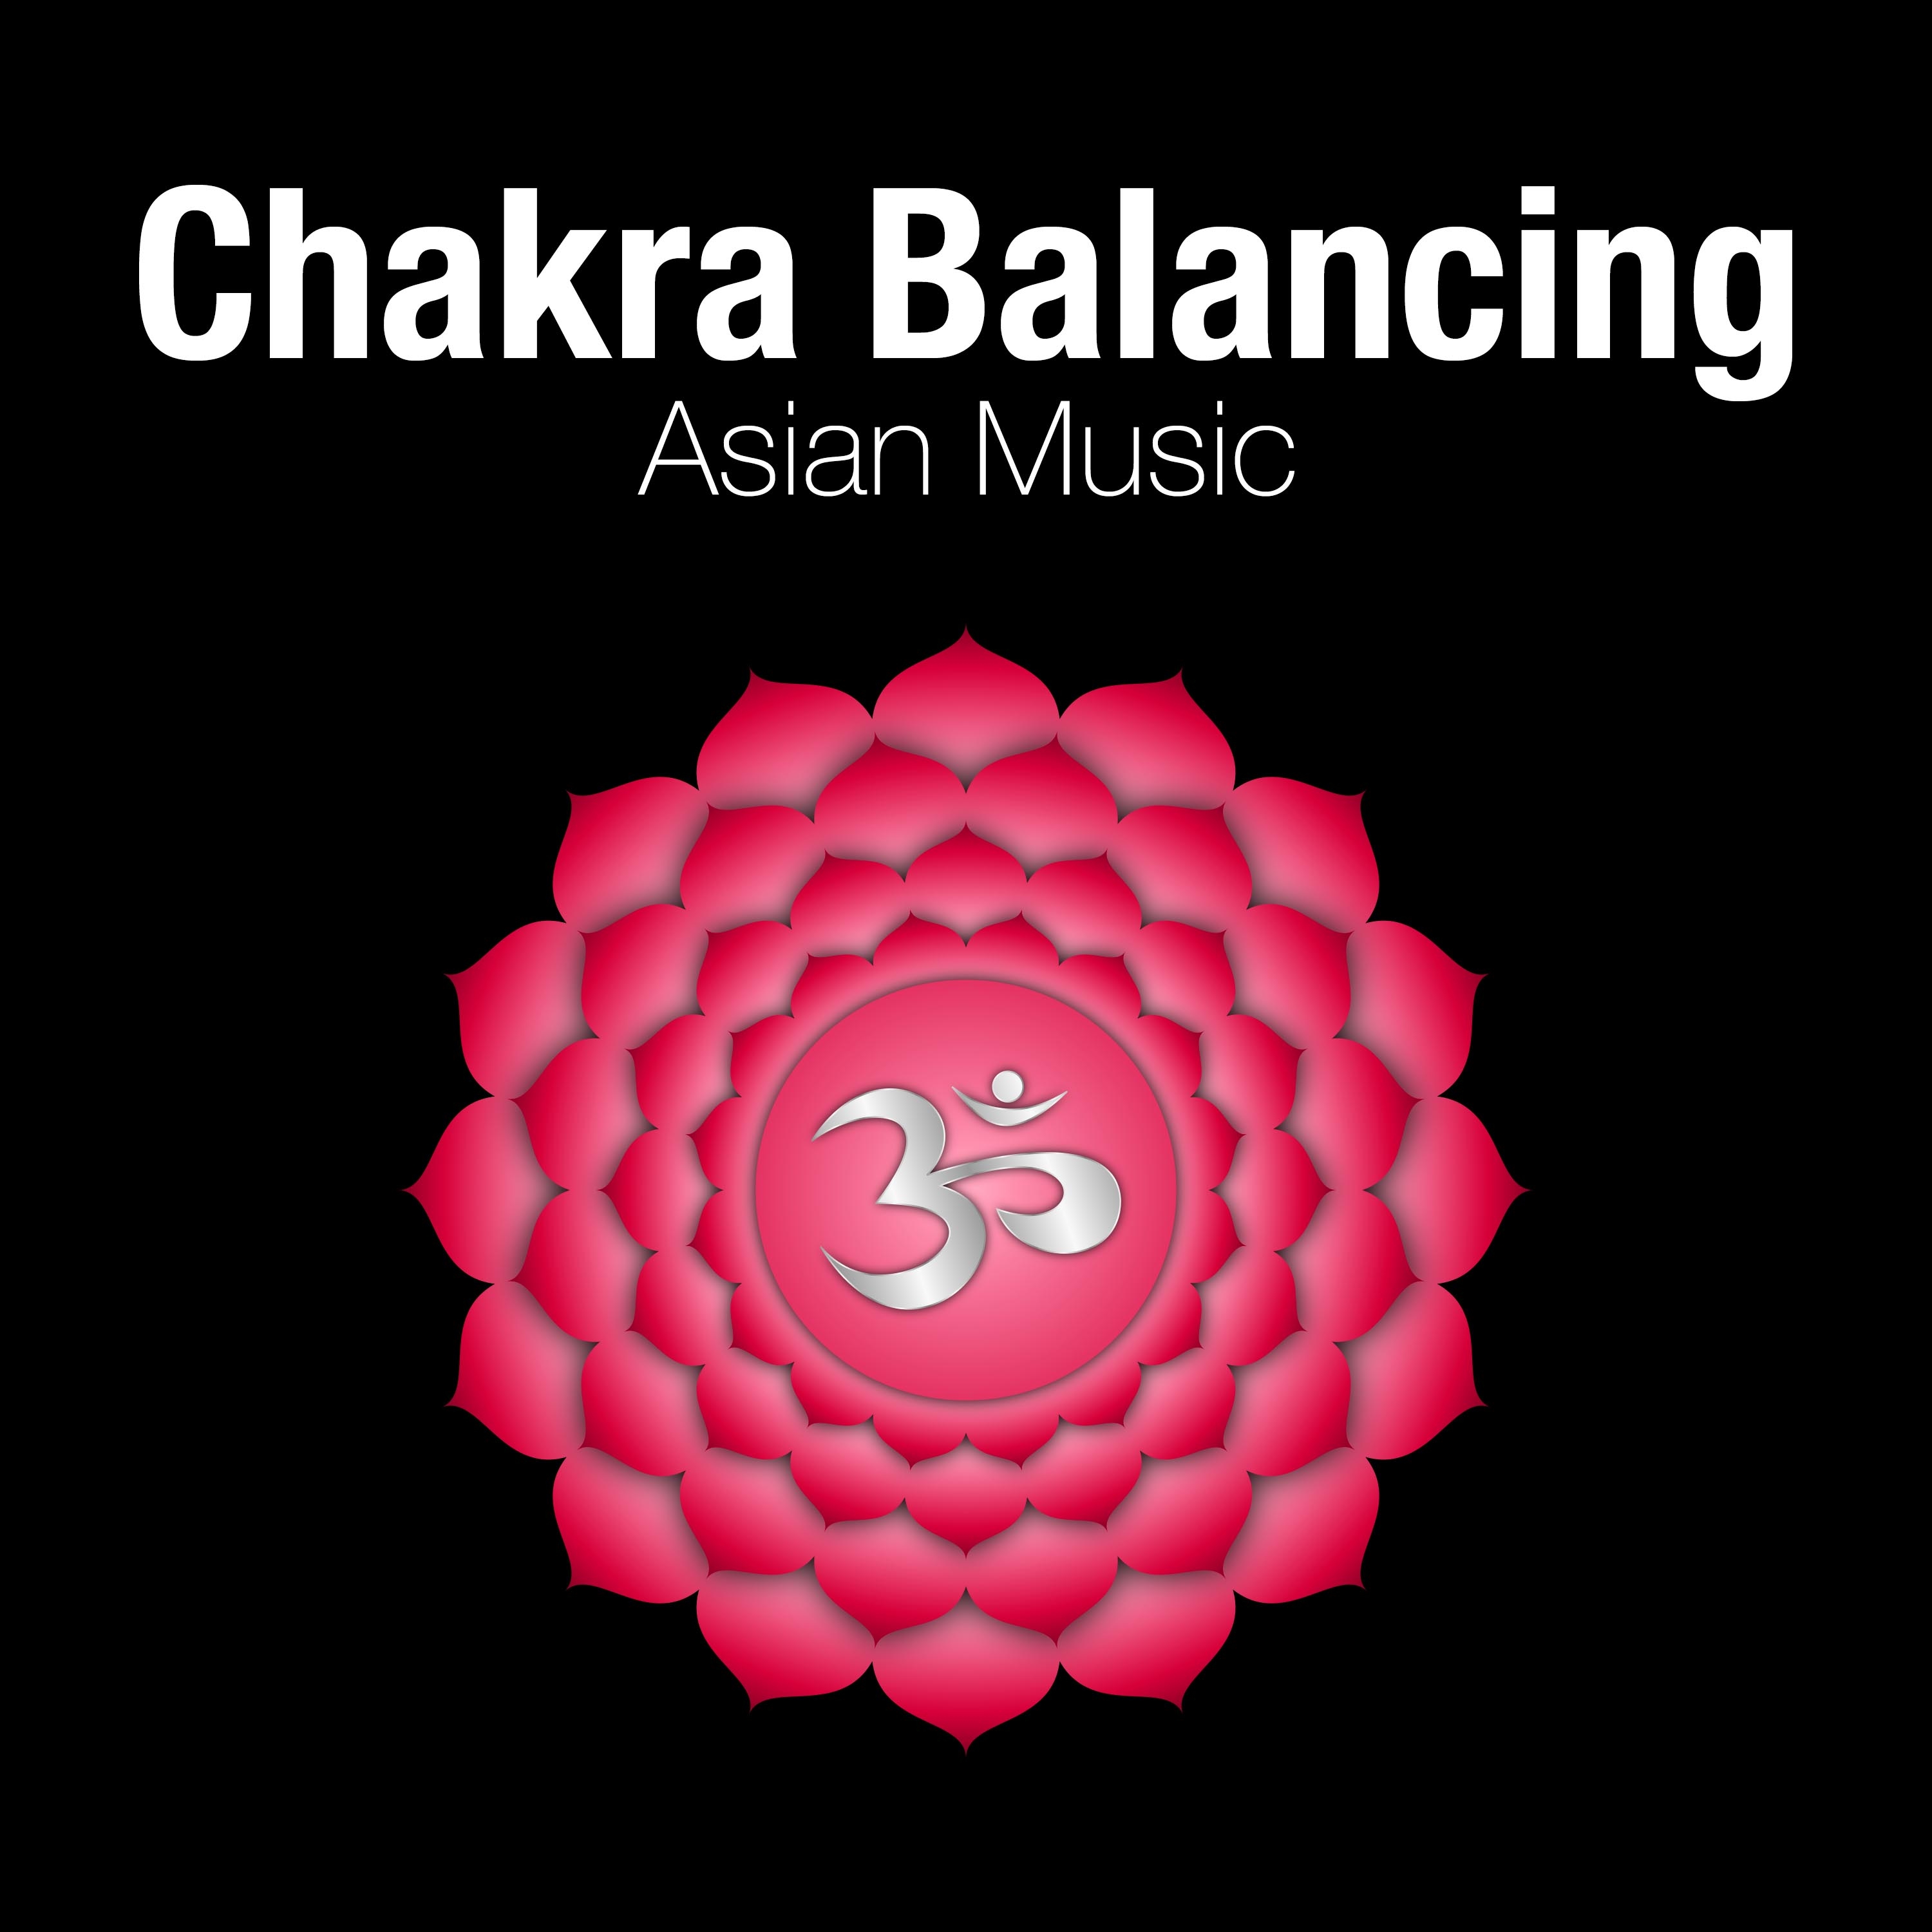 Chakra Balancing - Asian Music, Instrumental Zen Songs to Find Peace, Relaxation and Serenity